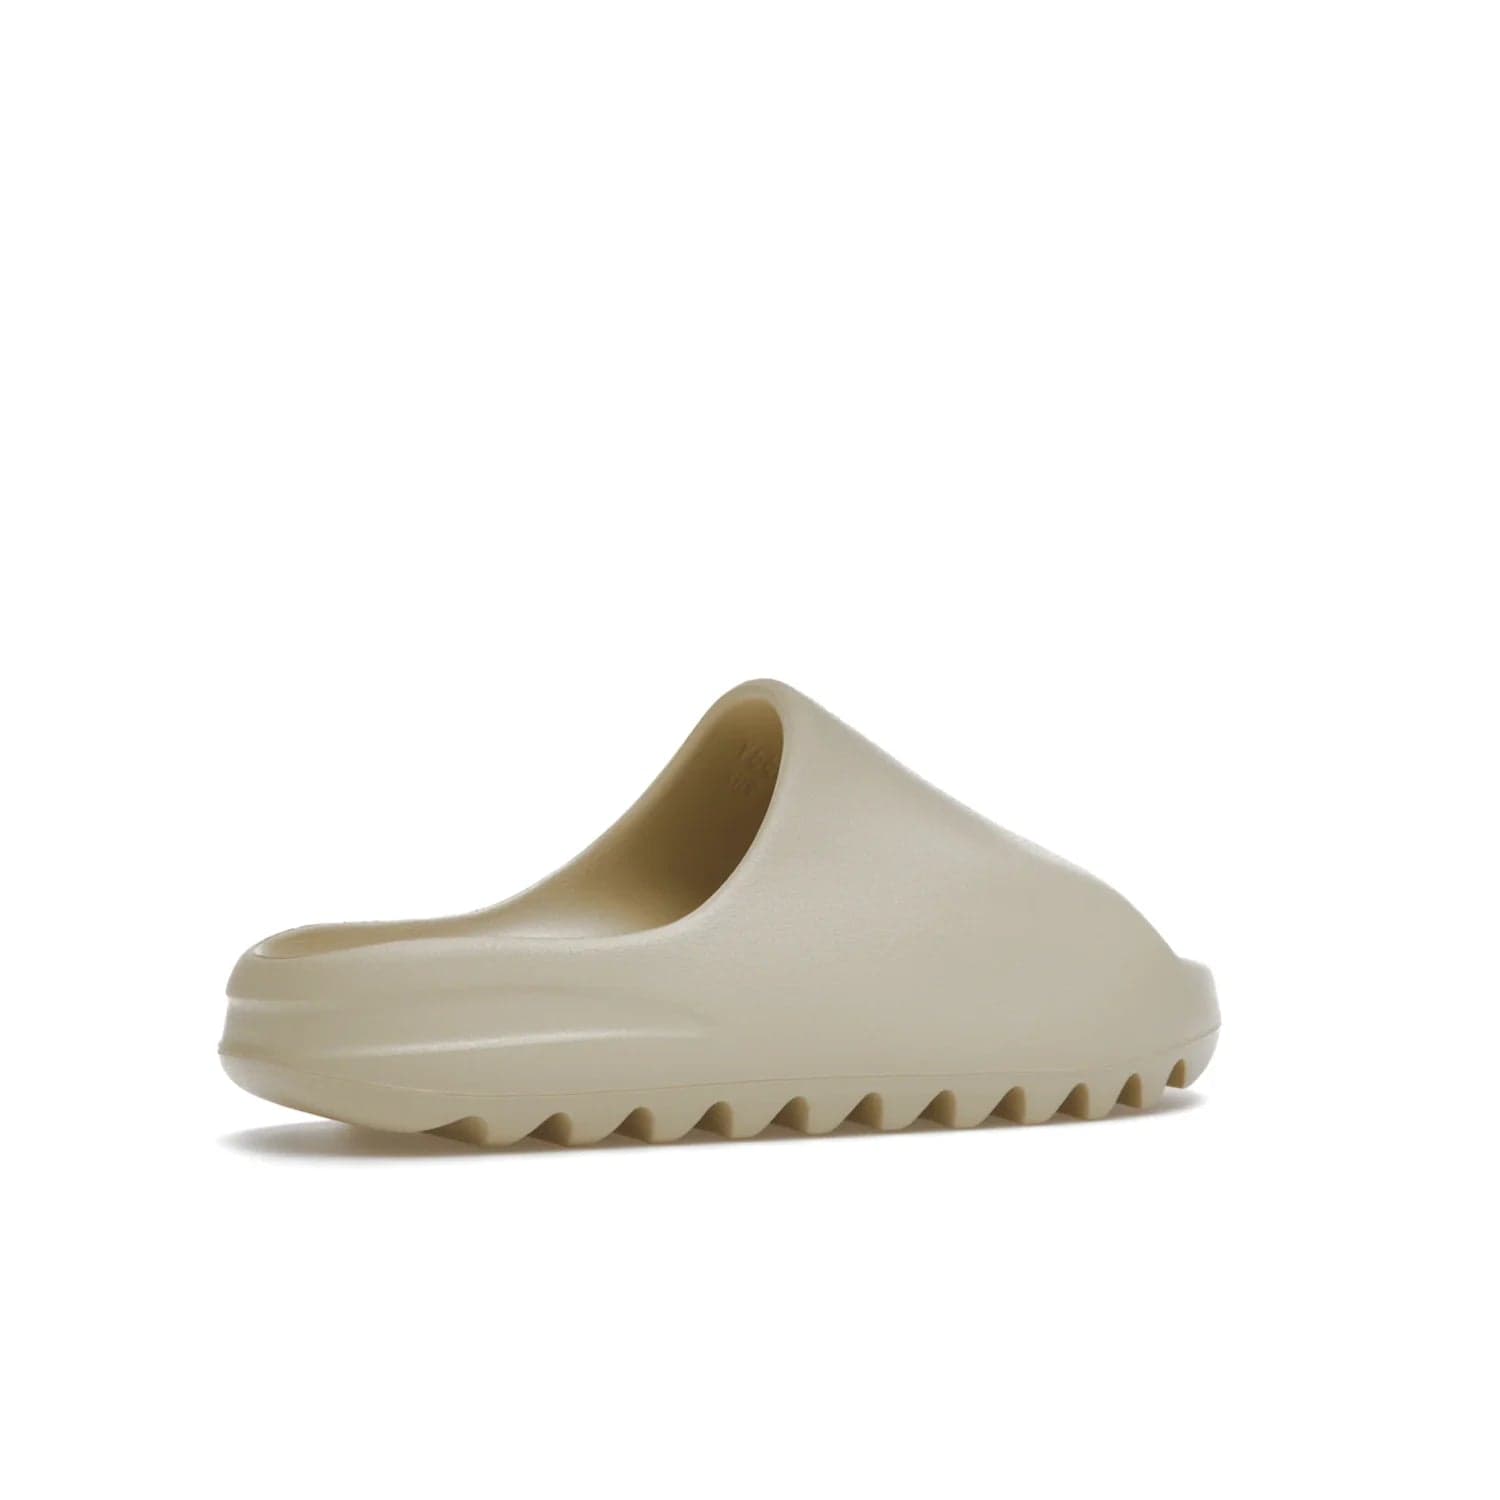 adidas Yeezy Slide Bone (2022 Restock) - Image 34 - Only at www.BallersClubKickz.com - Stay comfy with the adidas Yeezy Slide Bone - a fashionable silhouette with all-day comfort. This Bone/Bone/Bone colorway combines style and comfort with a pebbled texture and grooved sole. Restocked in May 2022, this shoe is the perfect addition to your collection.